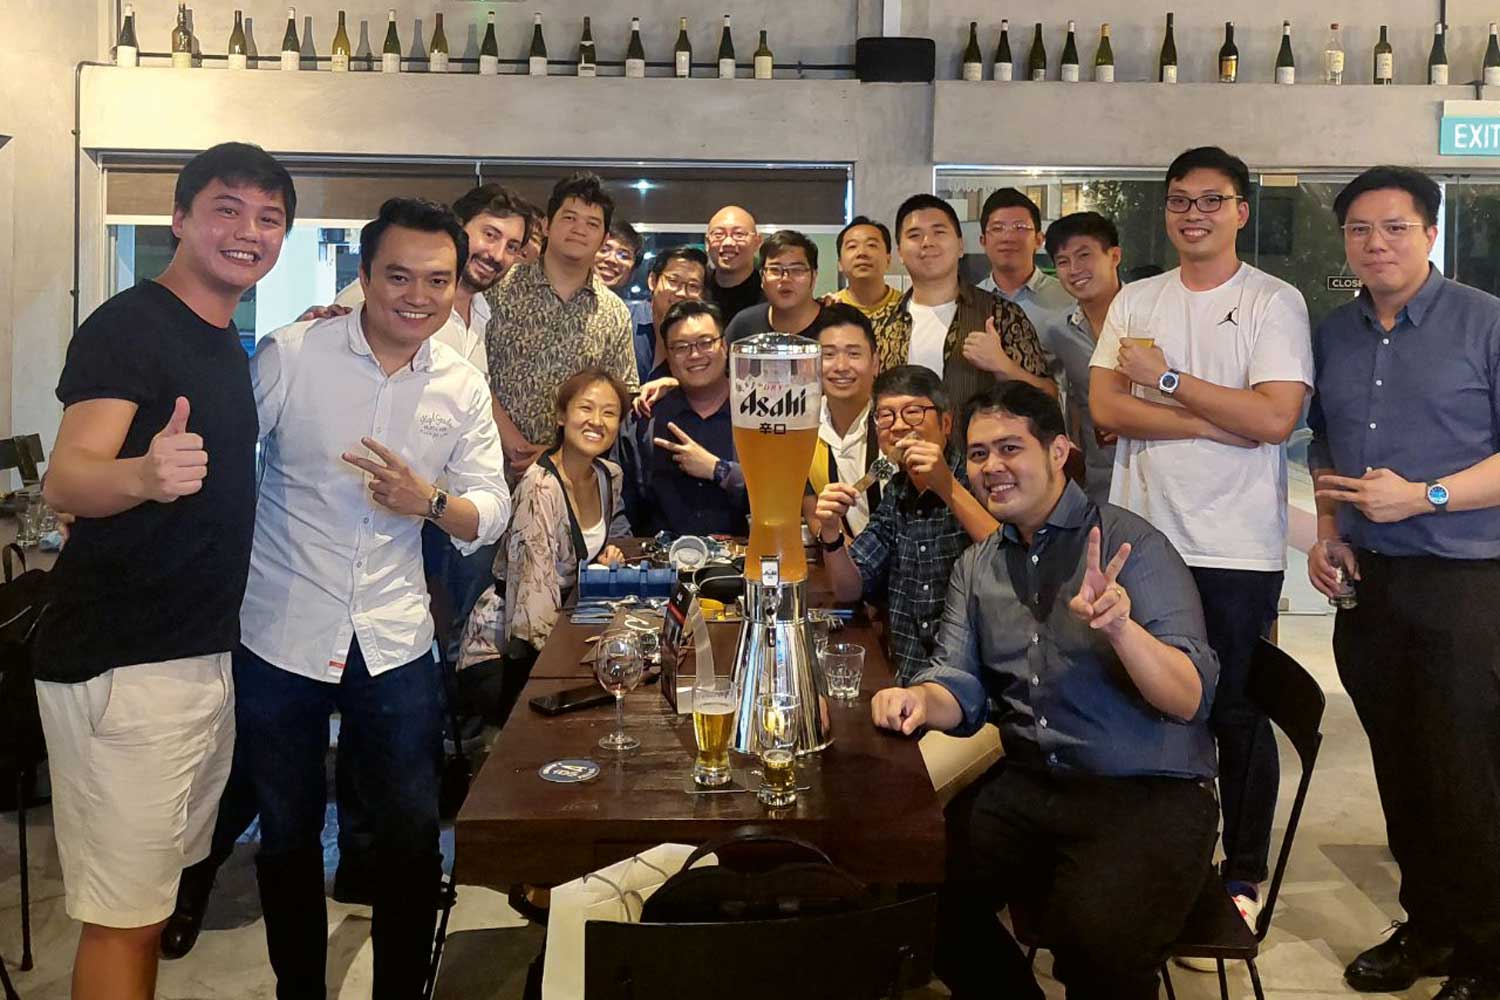 The RedBar Singapore chapter discussing watches over libations